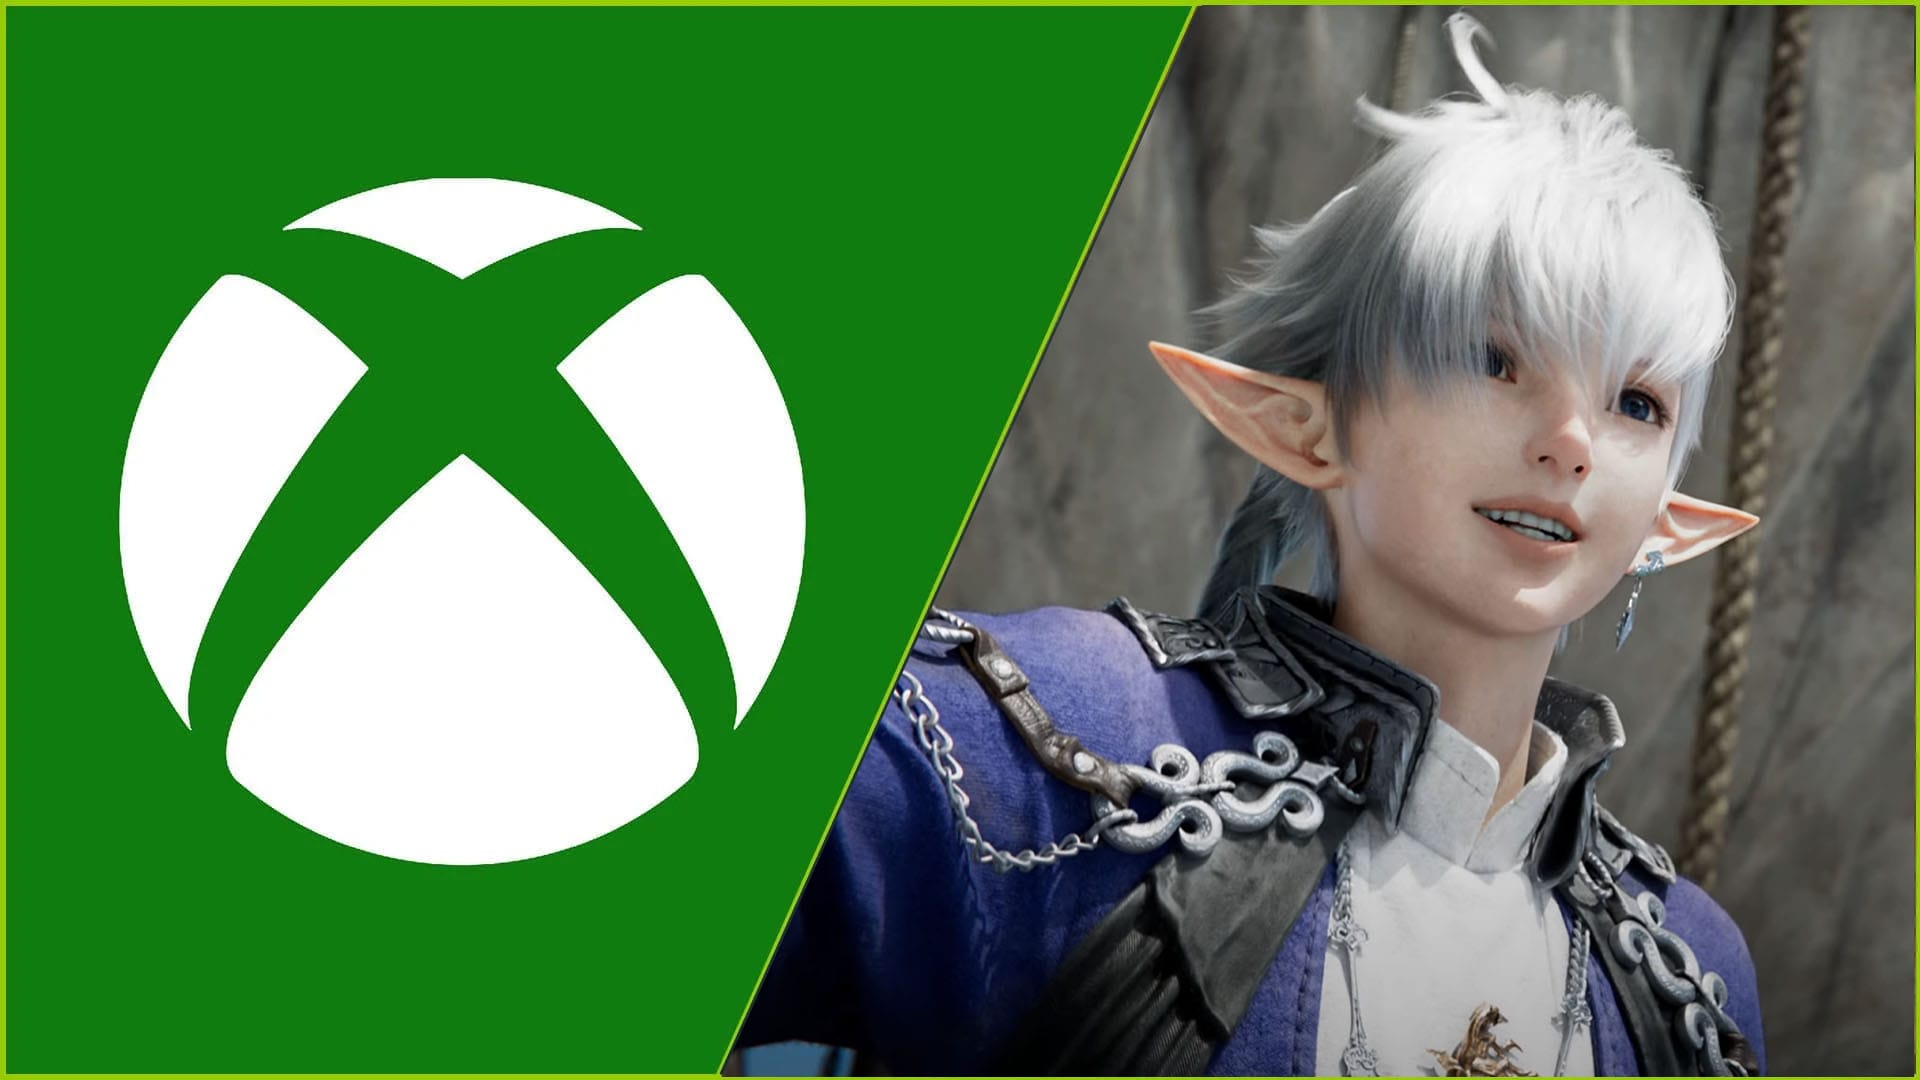 Final Fantasy XIV Passes 30 Million Players as Xbox Open Beta Gets Tentative Release Date